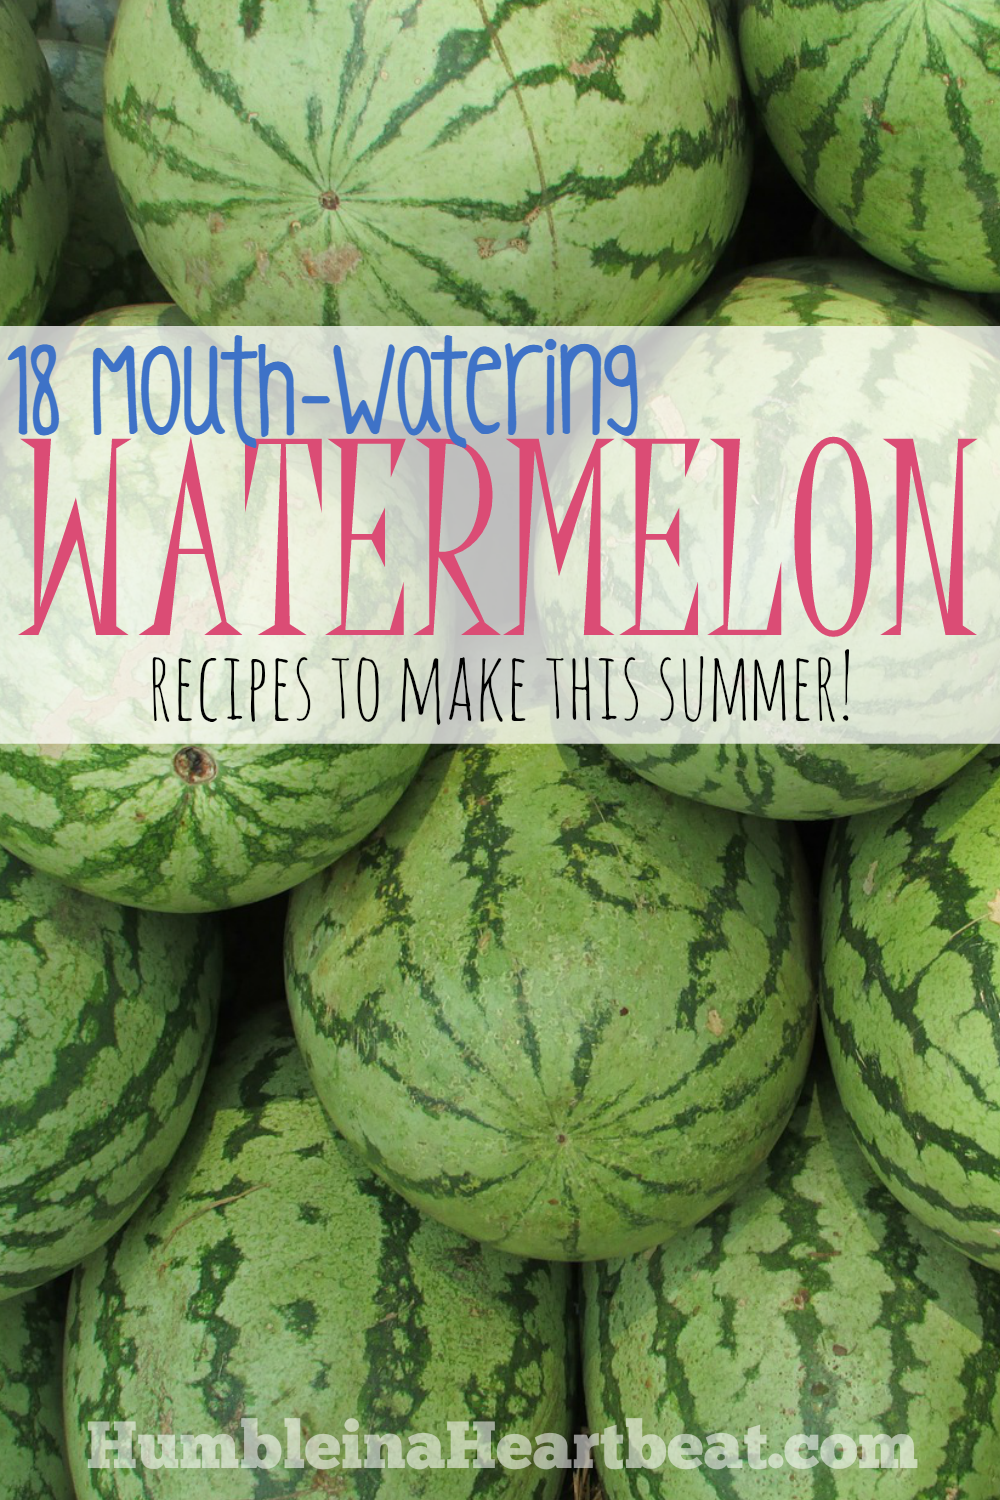 If you find watermelon for a great price or even have an overabundance of watermelon from your garden, try these yummy watermelon recipes this summer!